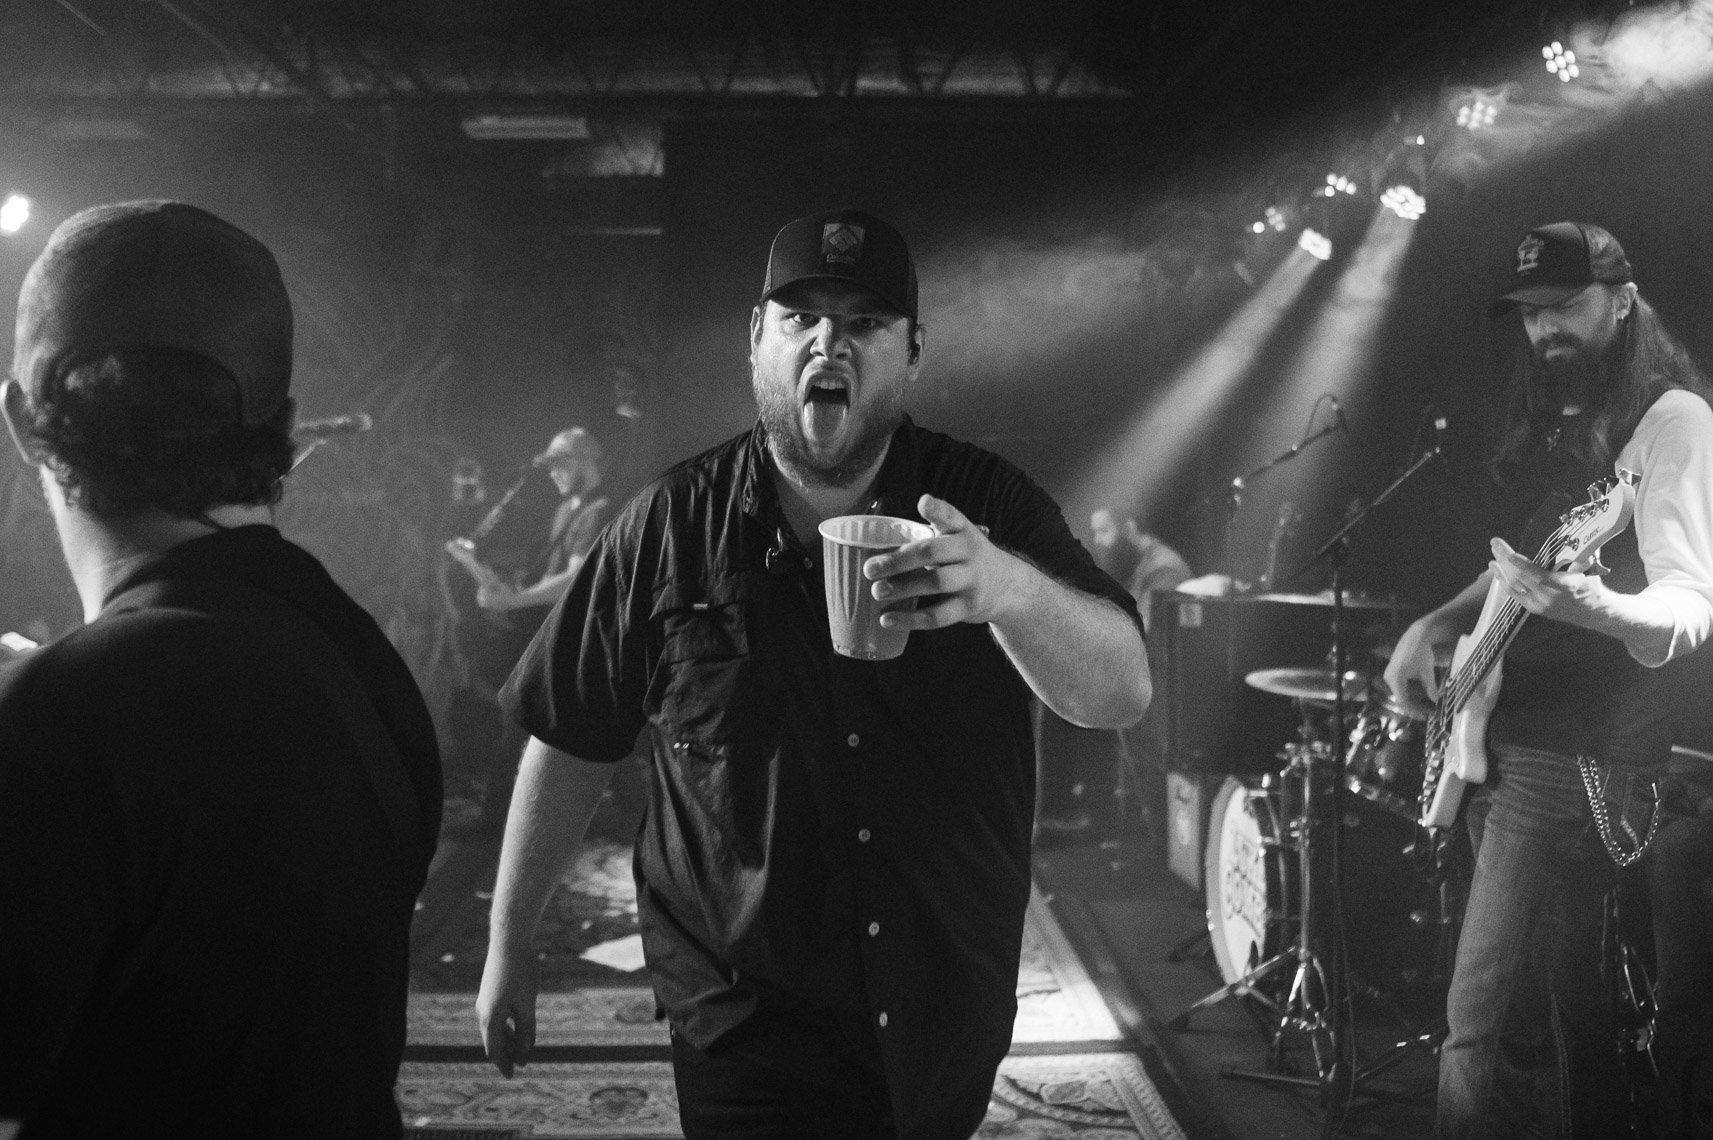 Luke Combs photographed at The Basement East in Nashville, TN. 